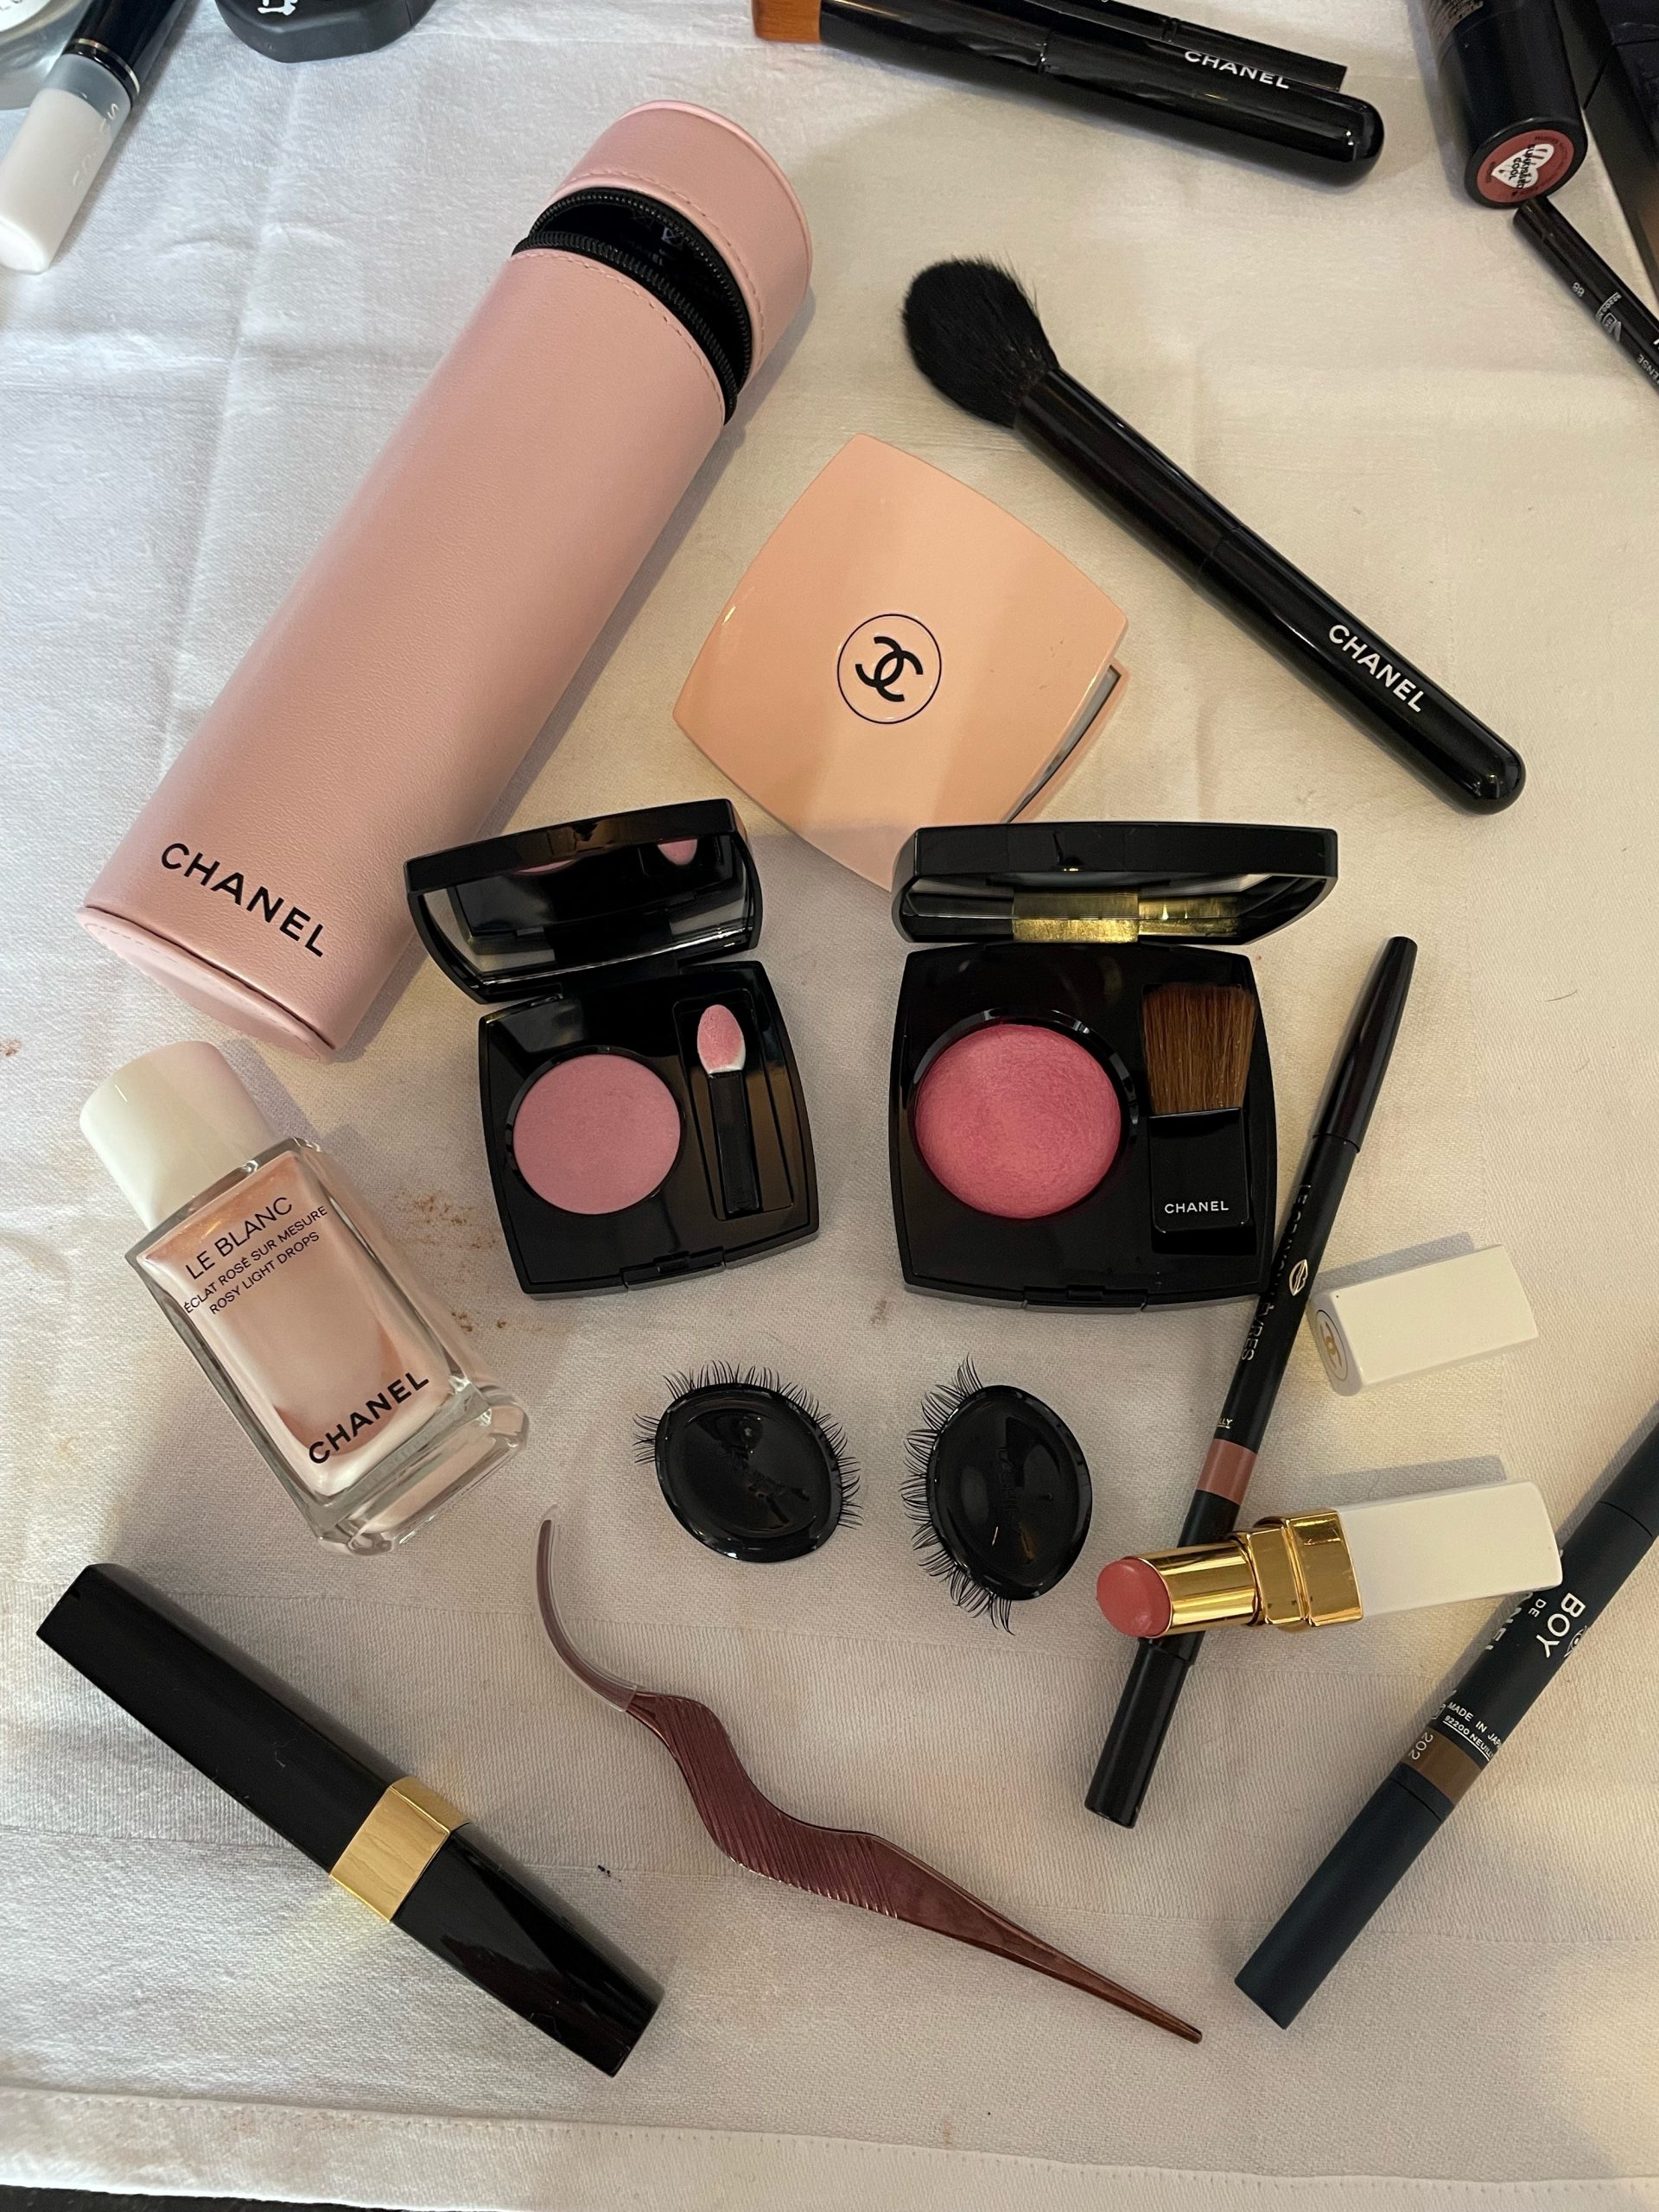 THE BARBIE LOOK CREATED BY CHANEL MAKEUP ARTIST PATI DUBROFF